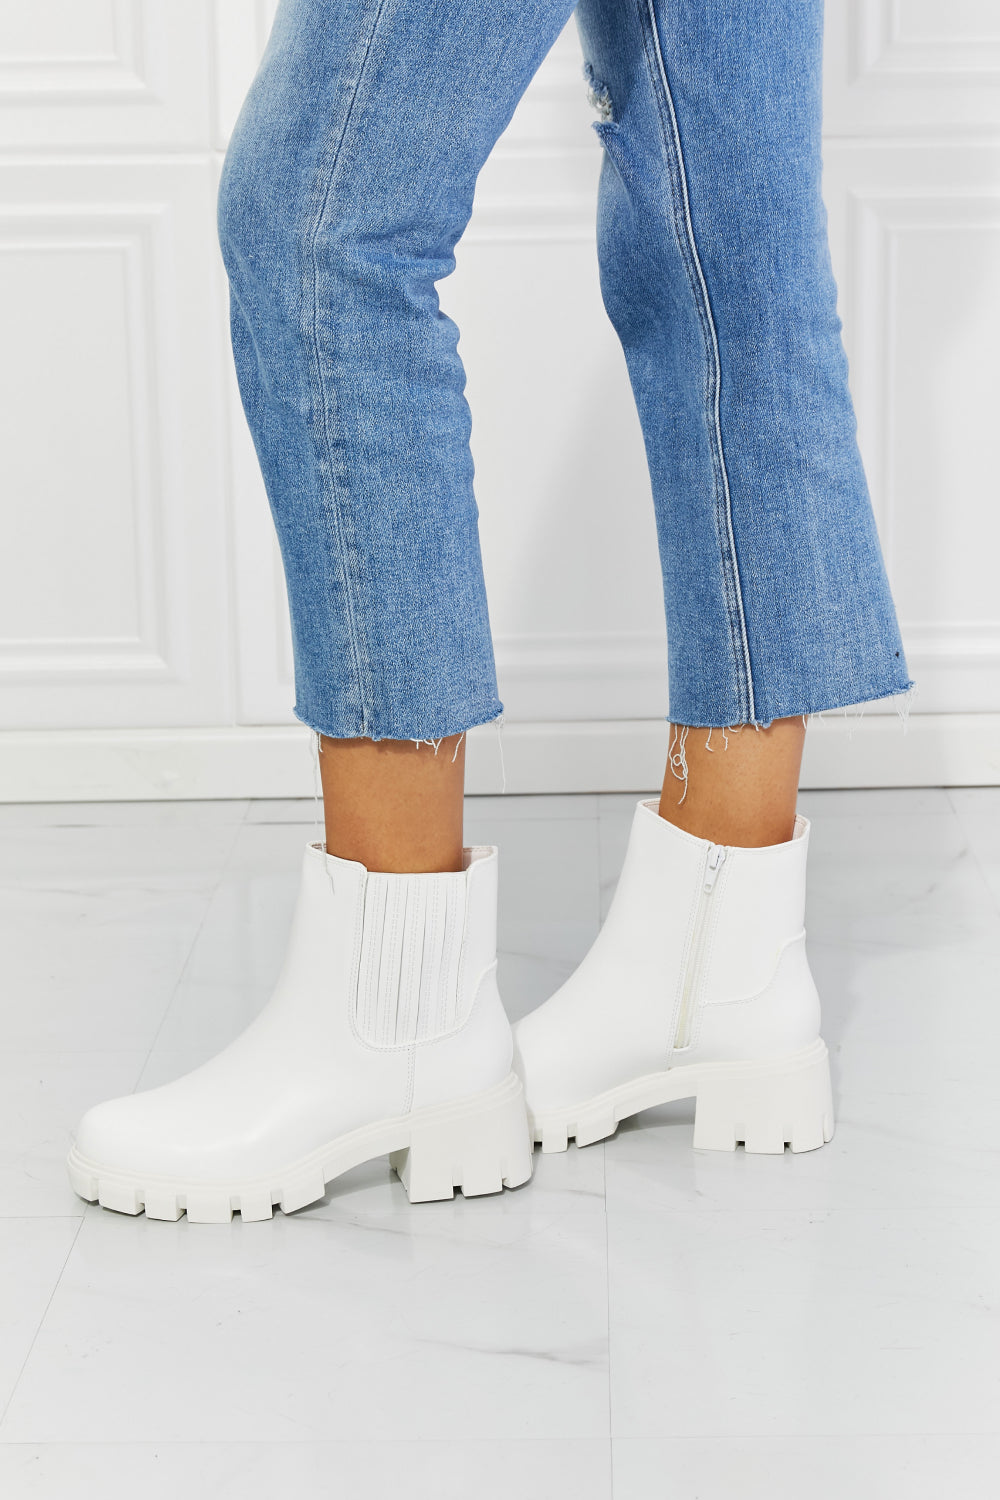 MMShoes What It Takes Lug Sole Chelsea Boots in White - AllIn Computer